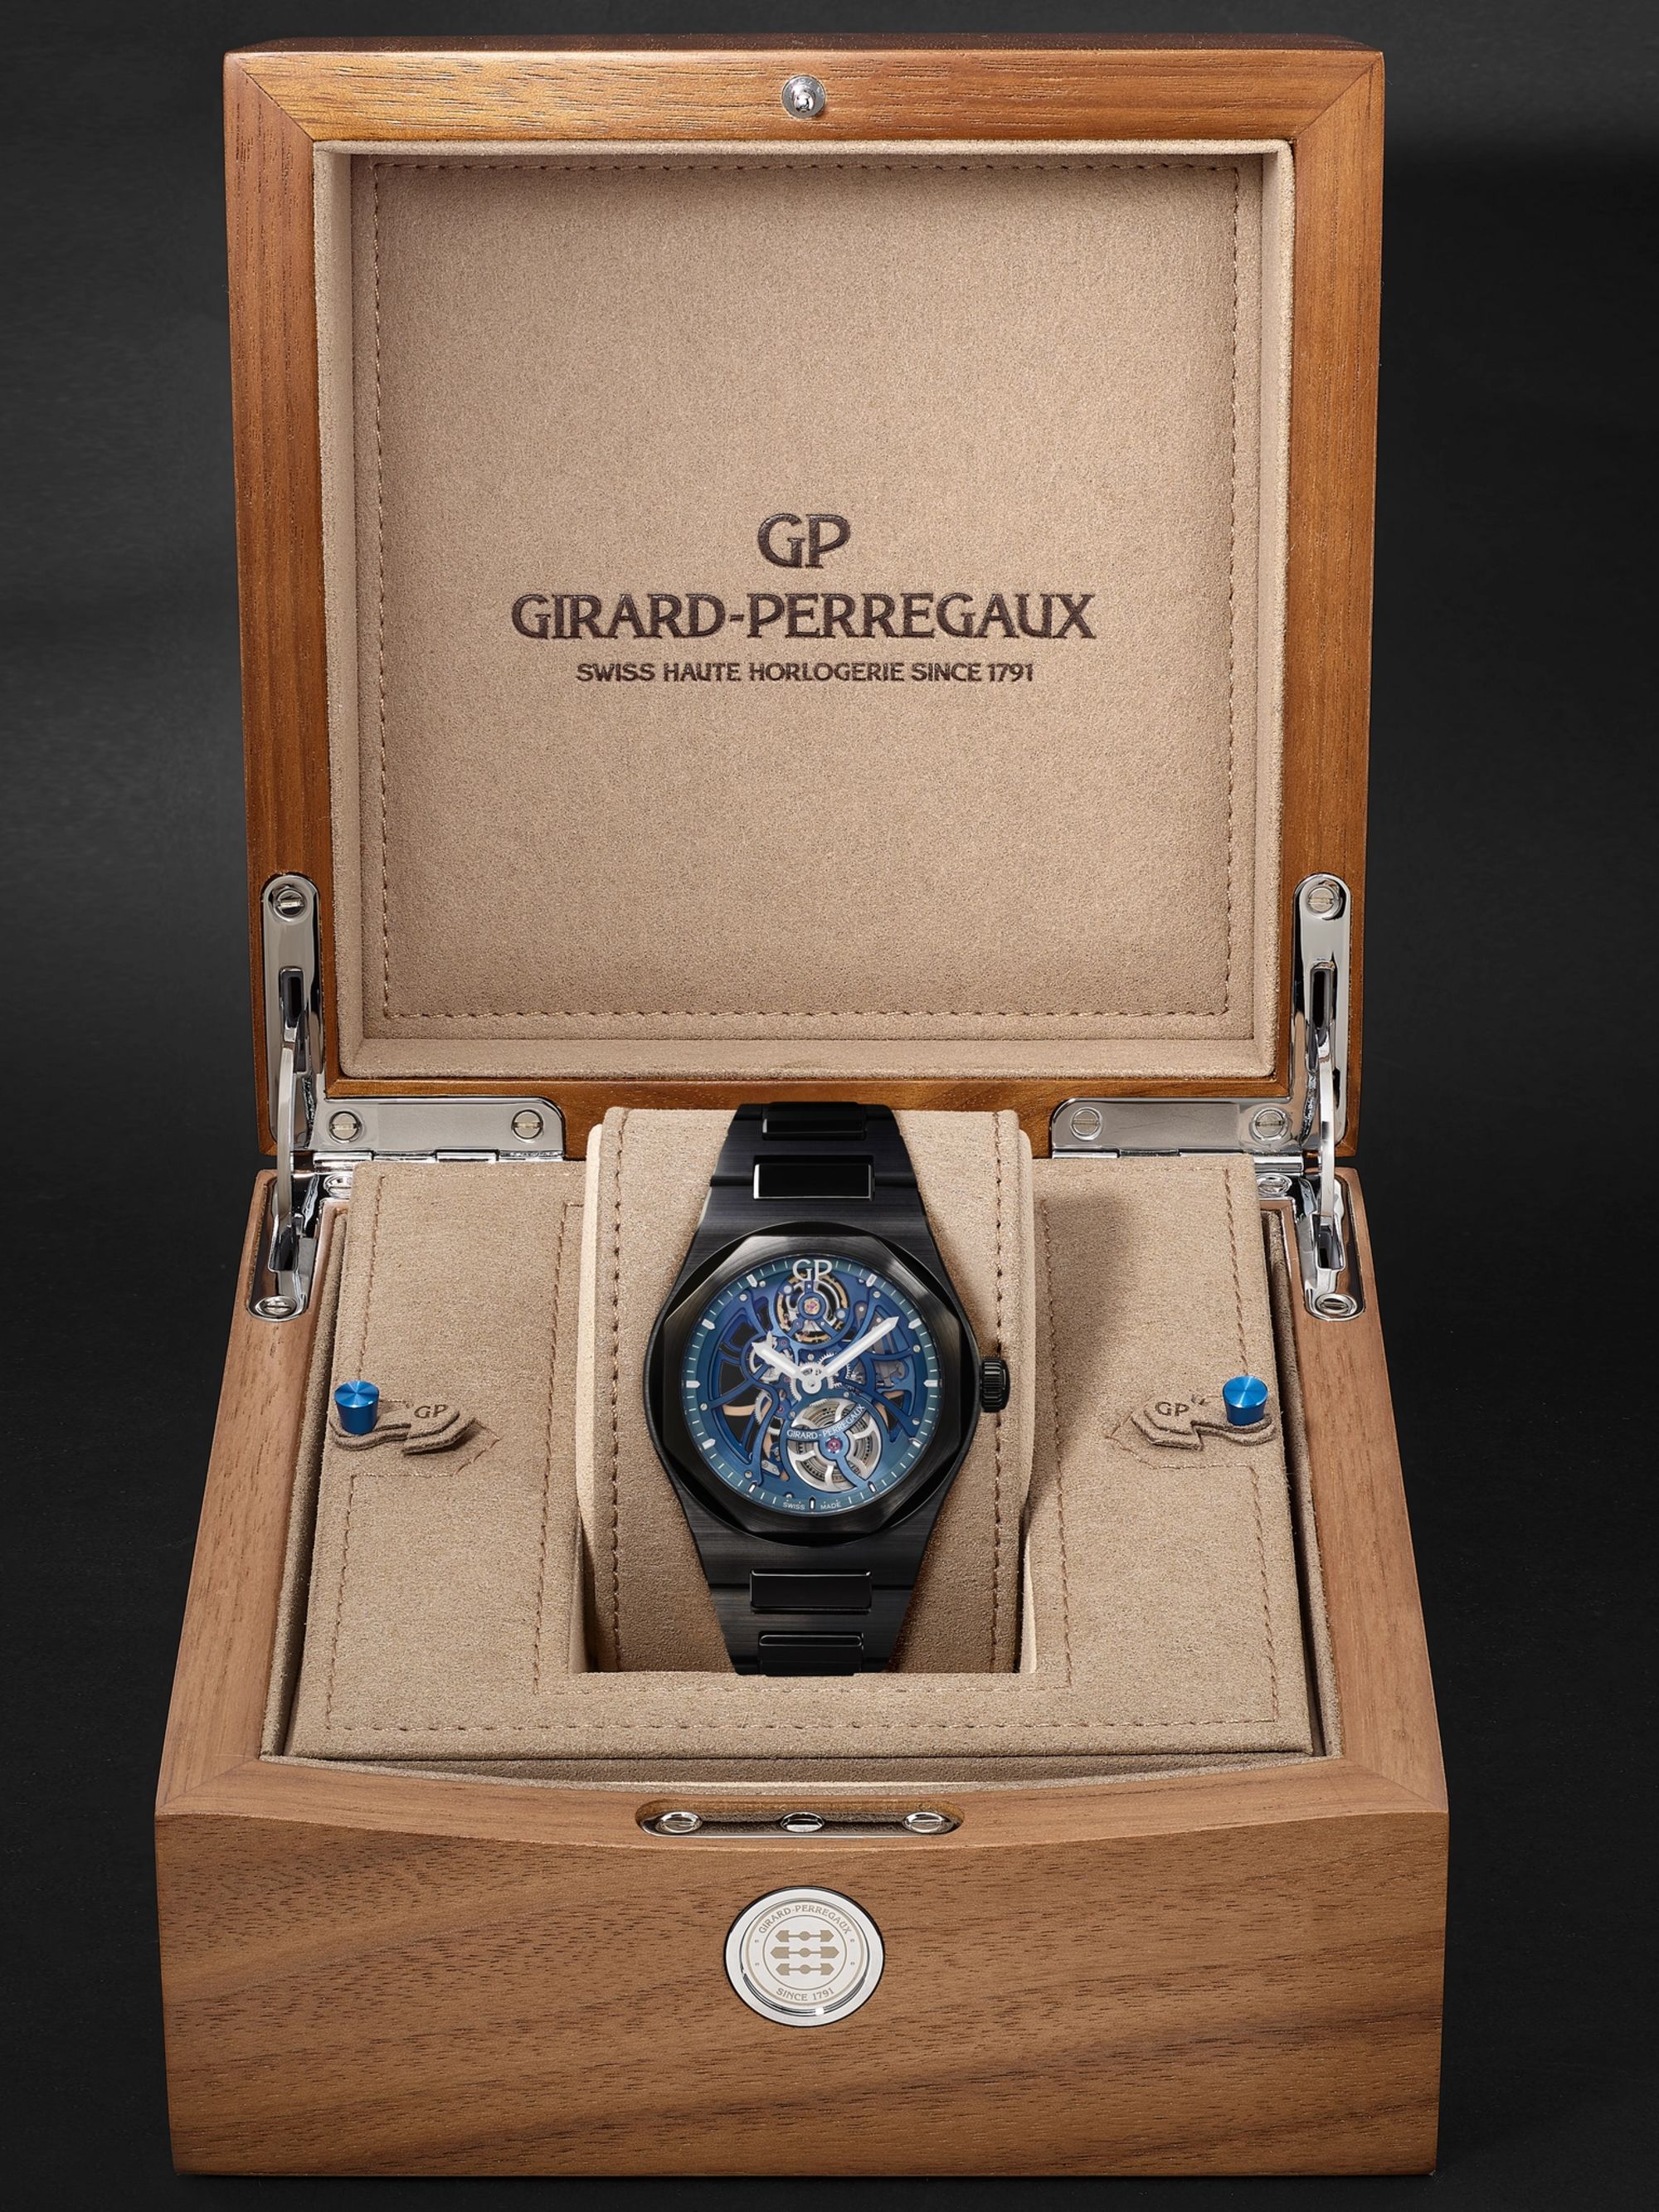 GIRARD-PERREGAUX Laureato Earth To Sky Automatic Skeleton 42mm Ceramic Watch, Ref. No. 81015-32-432-32A